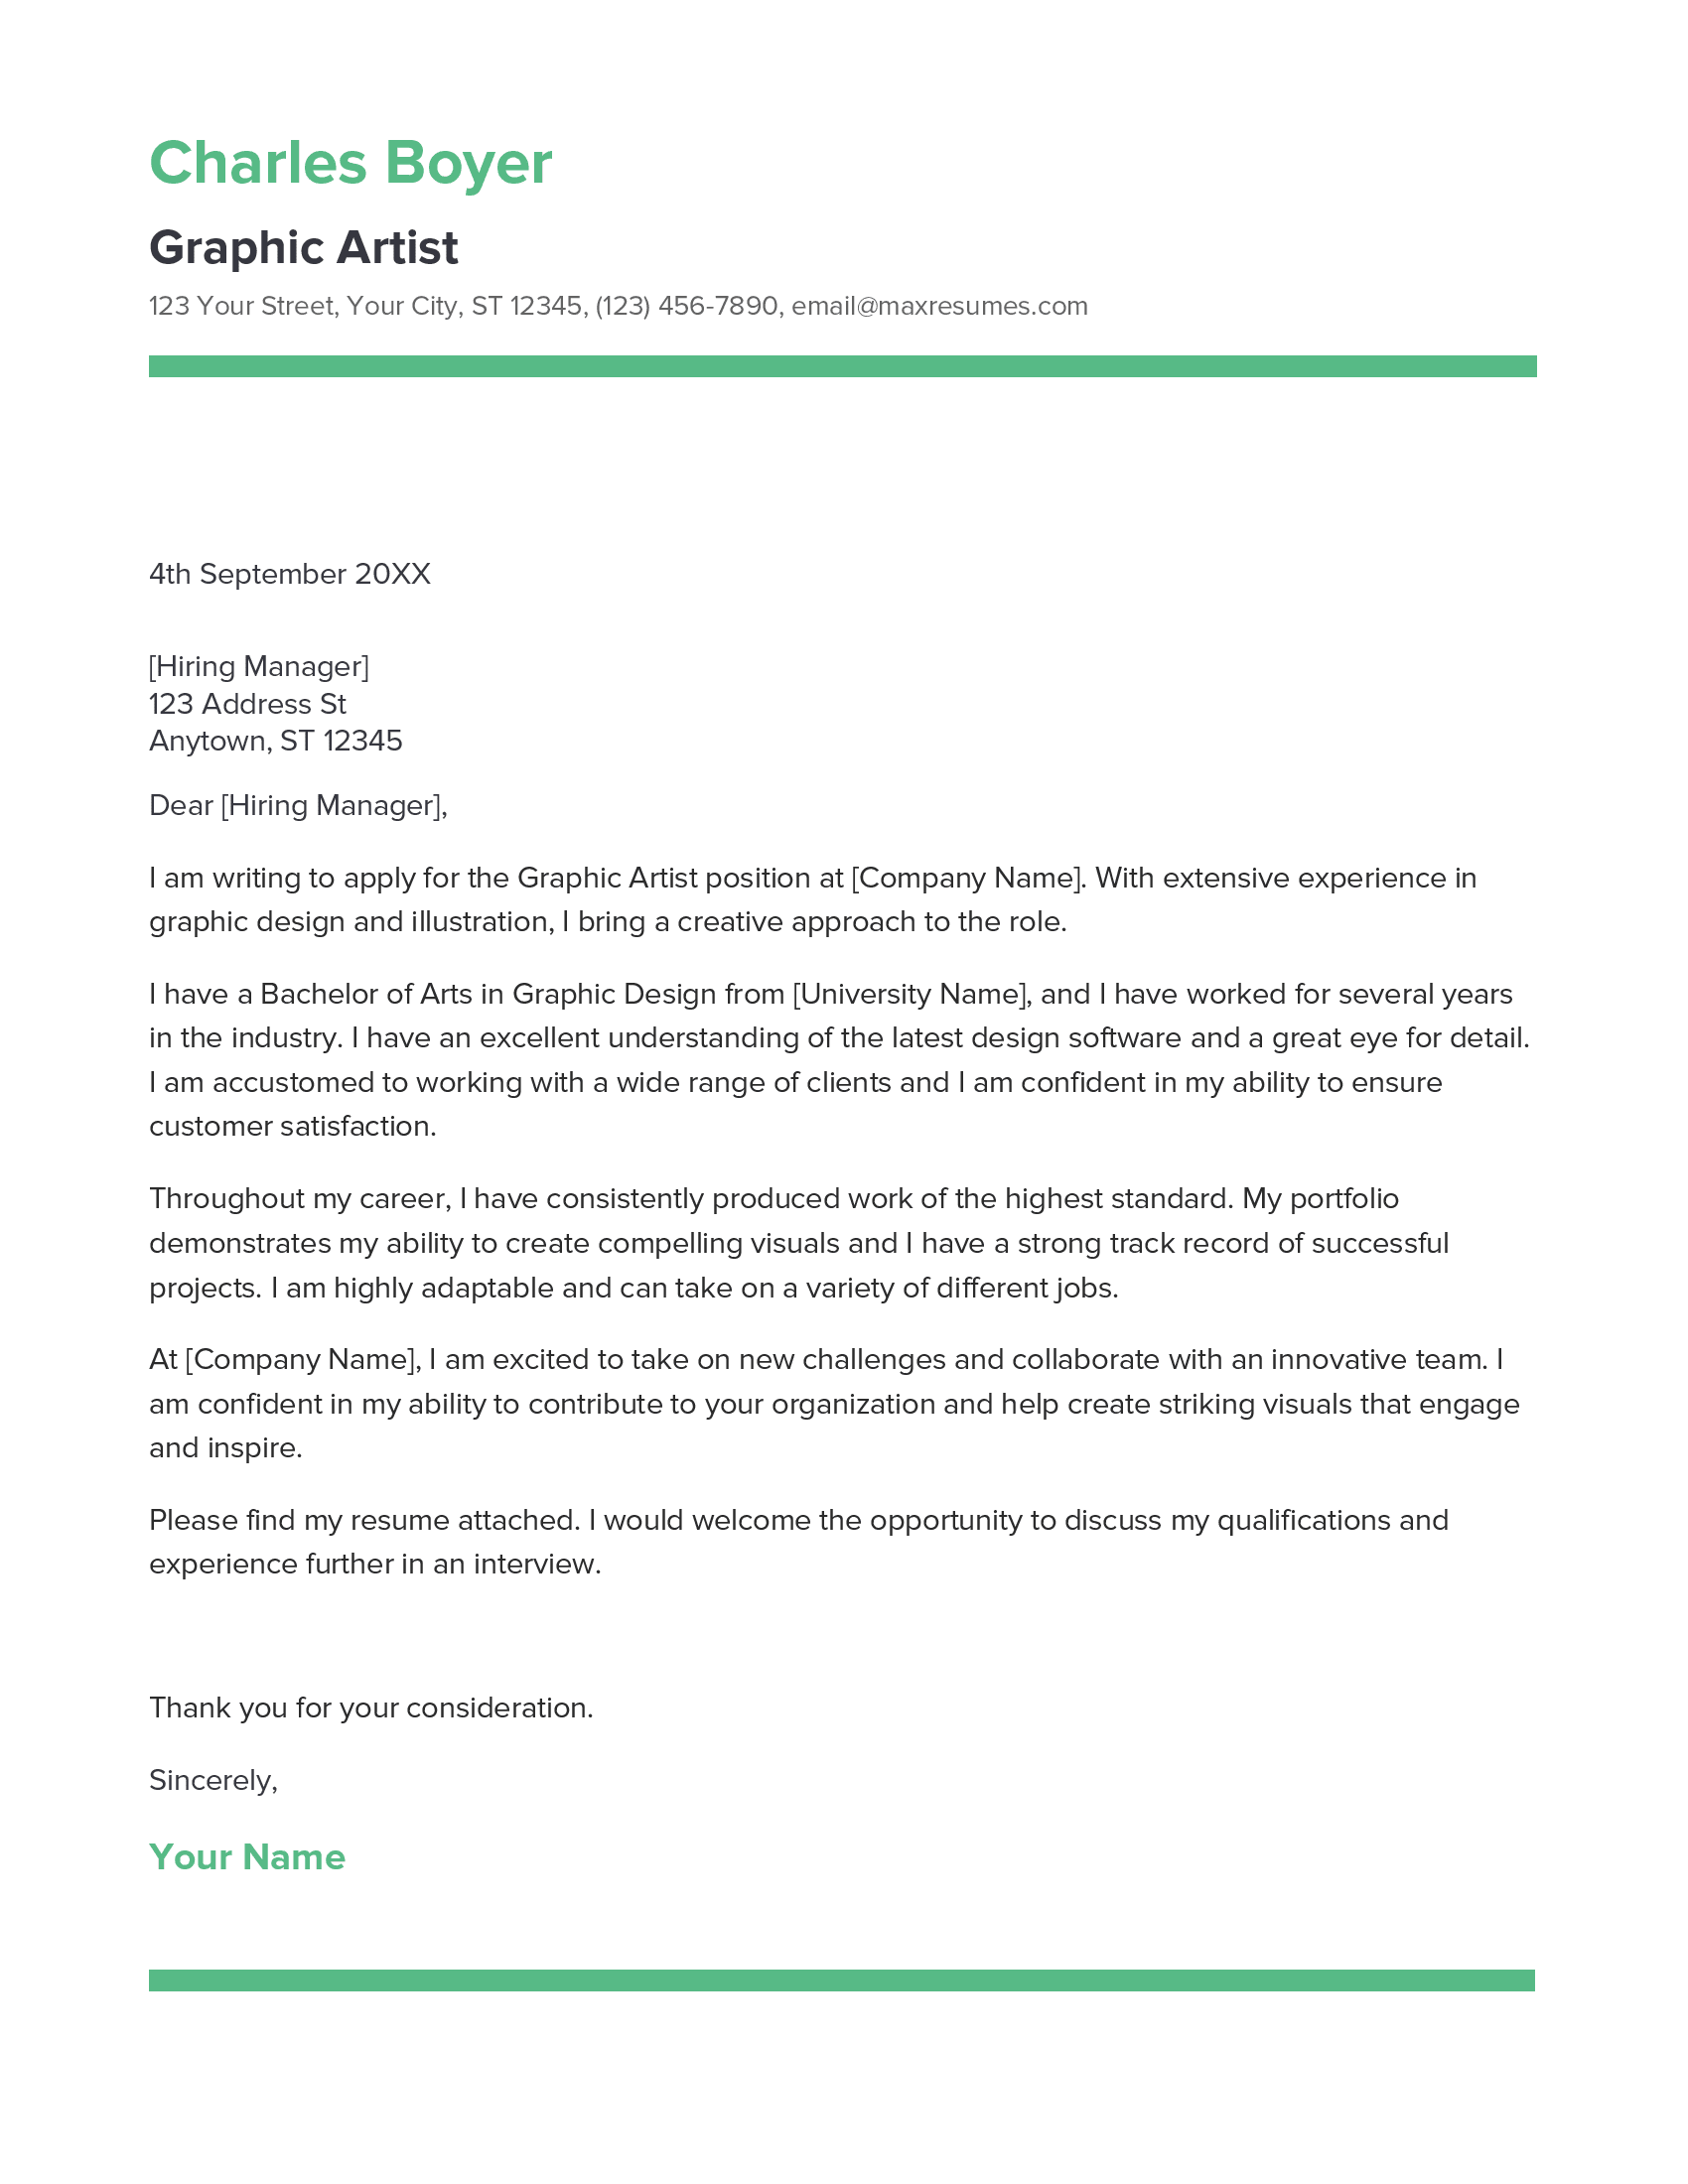 Graphic Artist Cover Letter Example